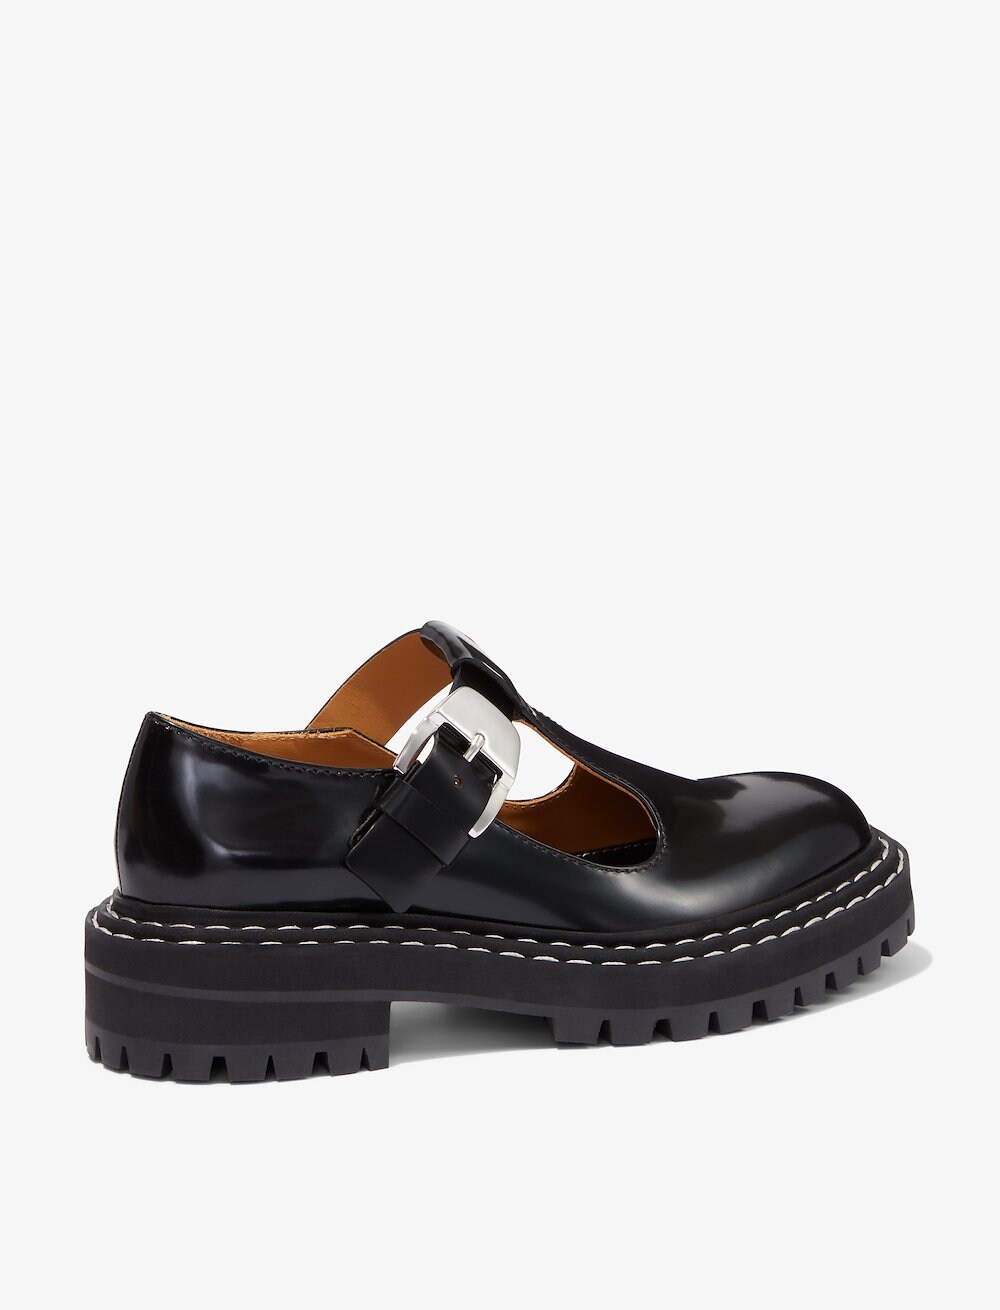 Proenza Schouler - Lug Sole Mary Janes | Official Site